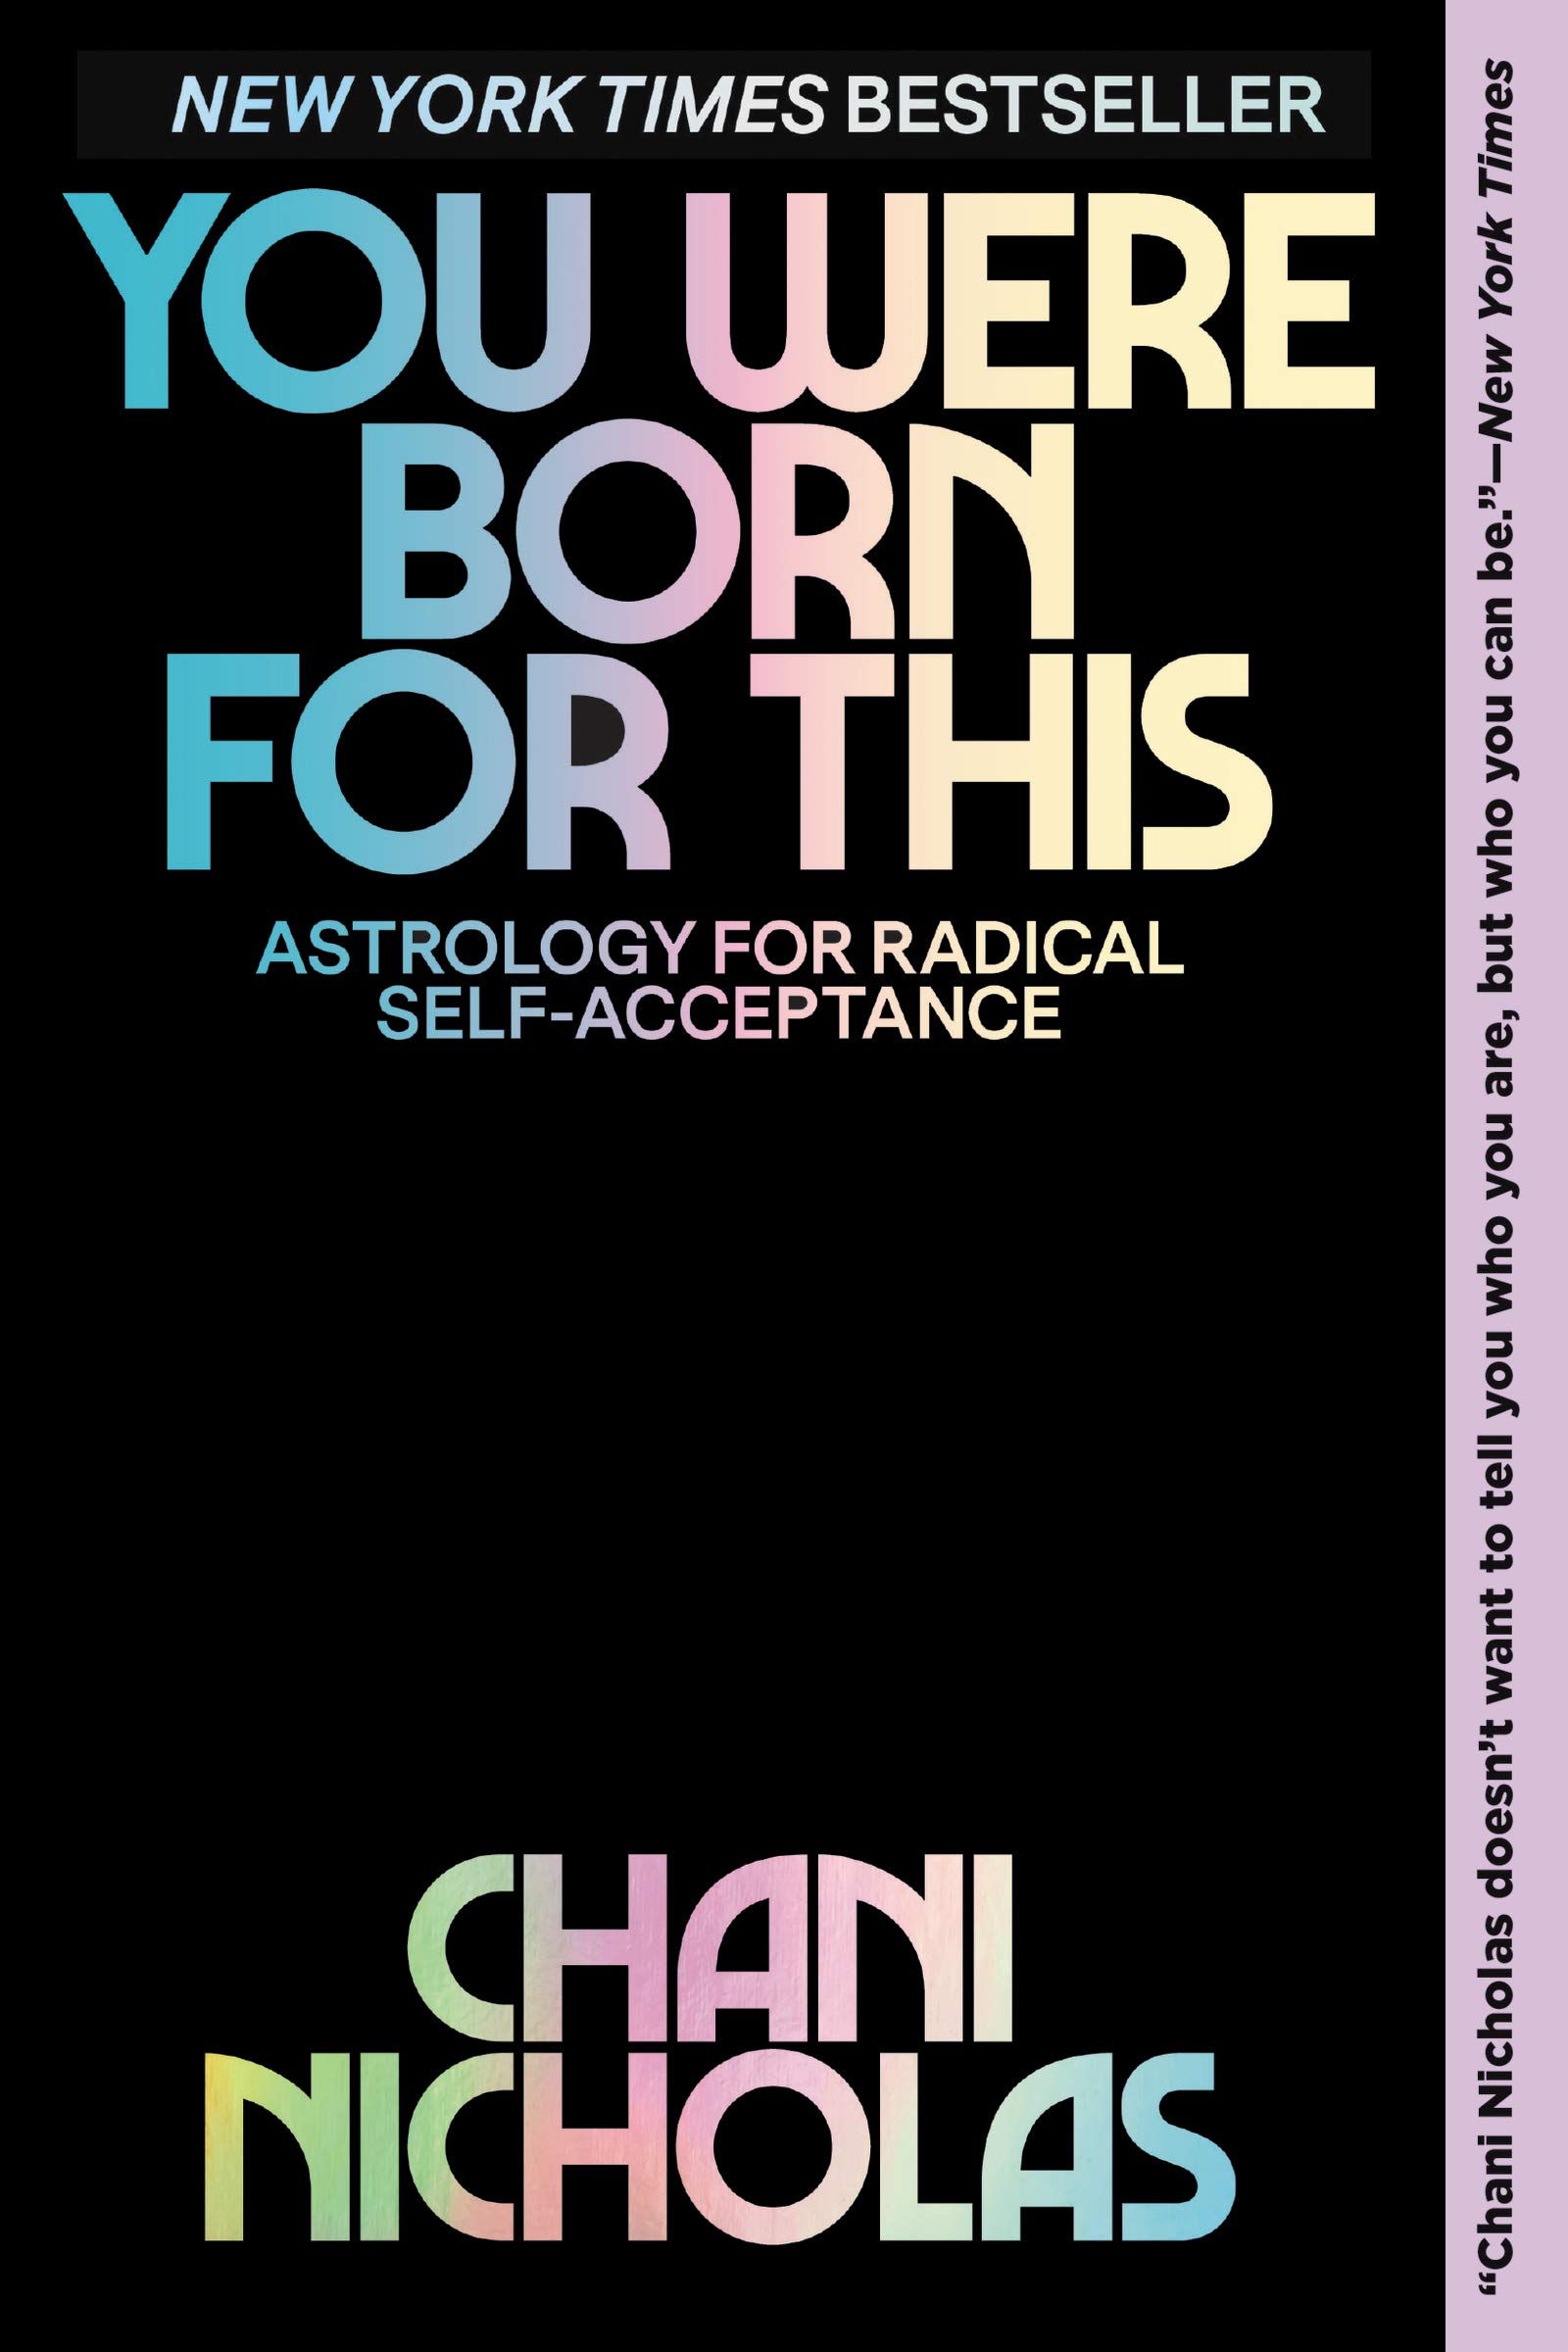 You Were Born for This- Astrology for Radical Self-Acceptance